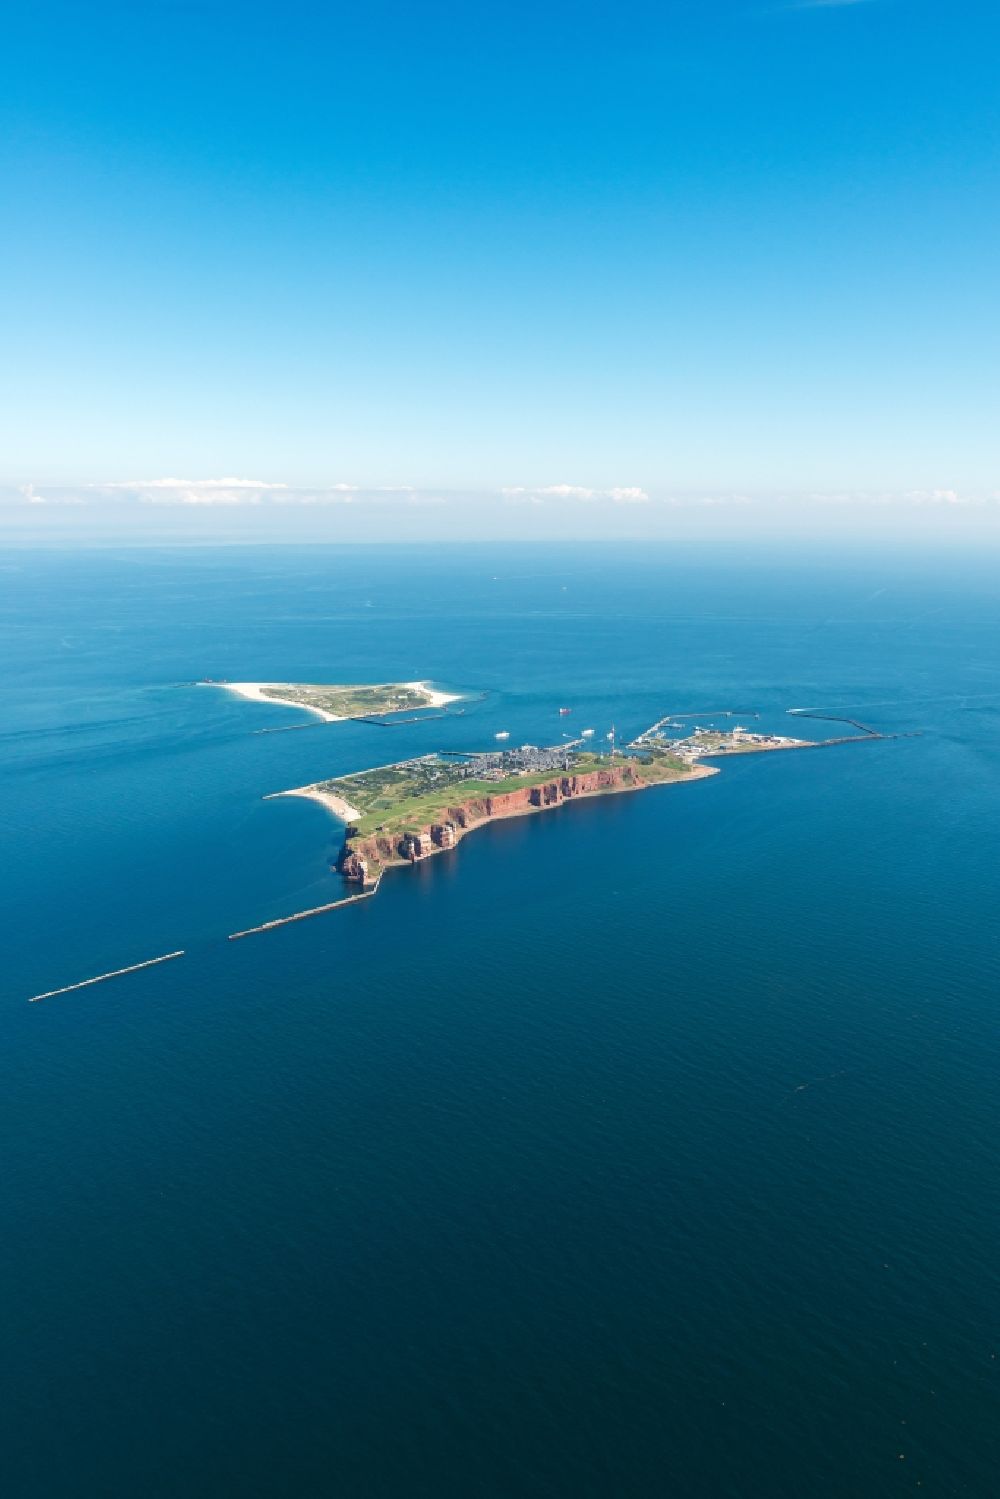 Aerial image Helgoland - The island of Helgoland in the North Sea to the port area on Helgoland in Schleswig-Holstein